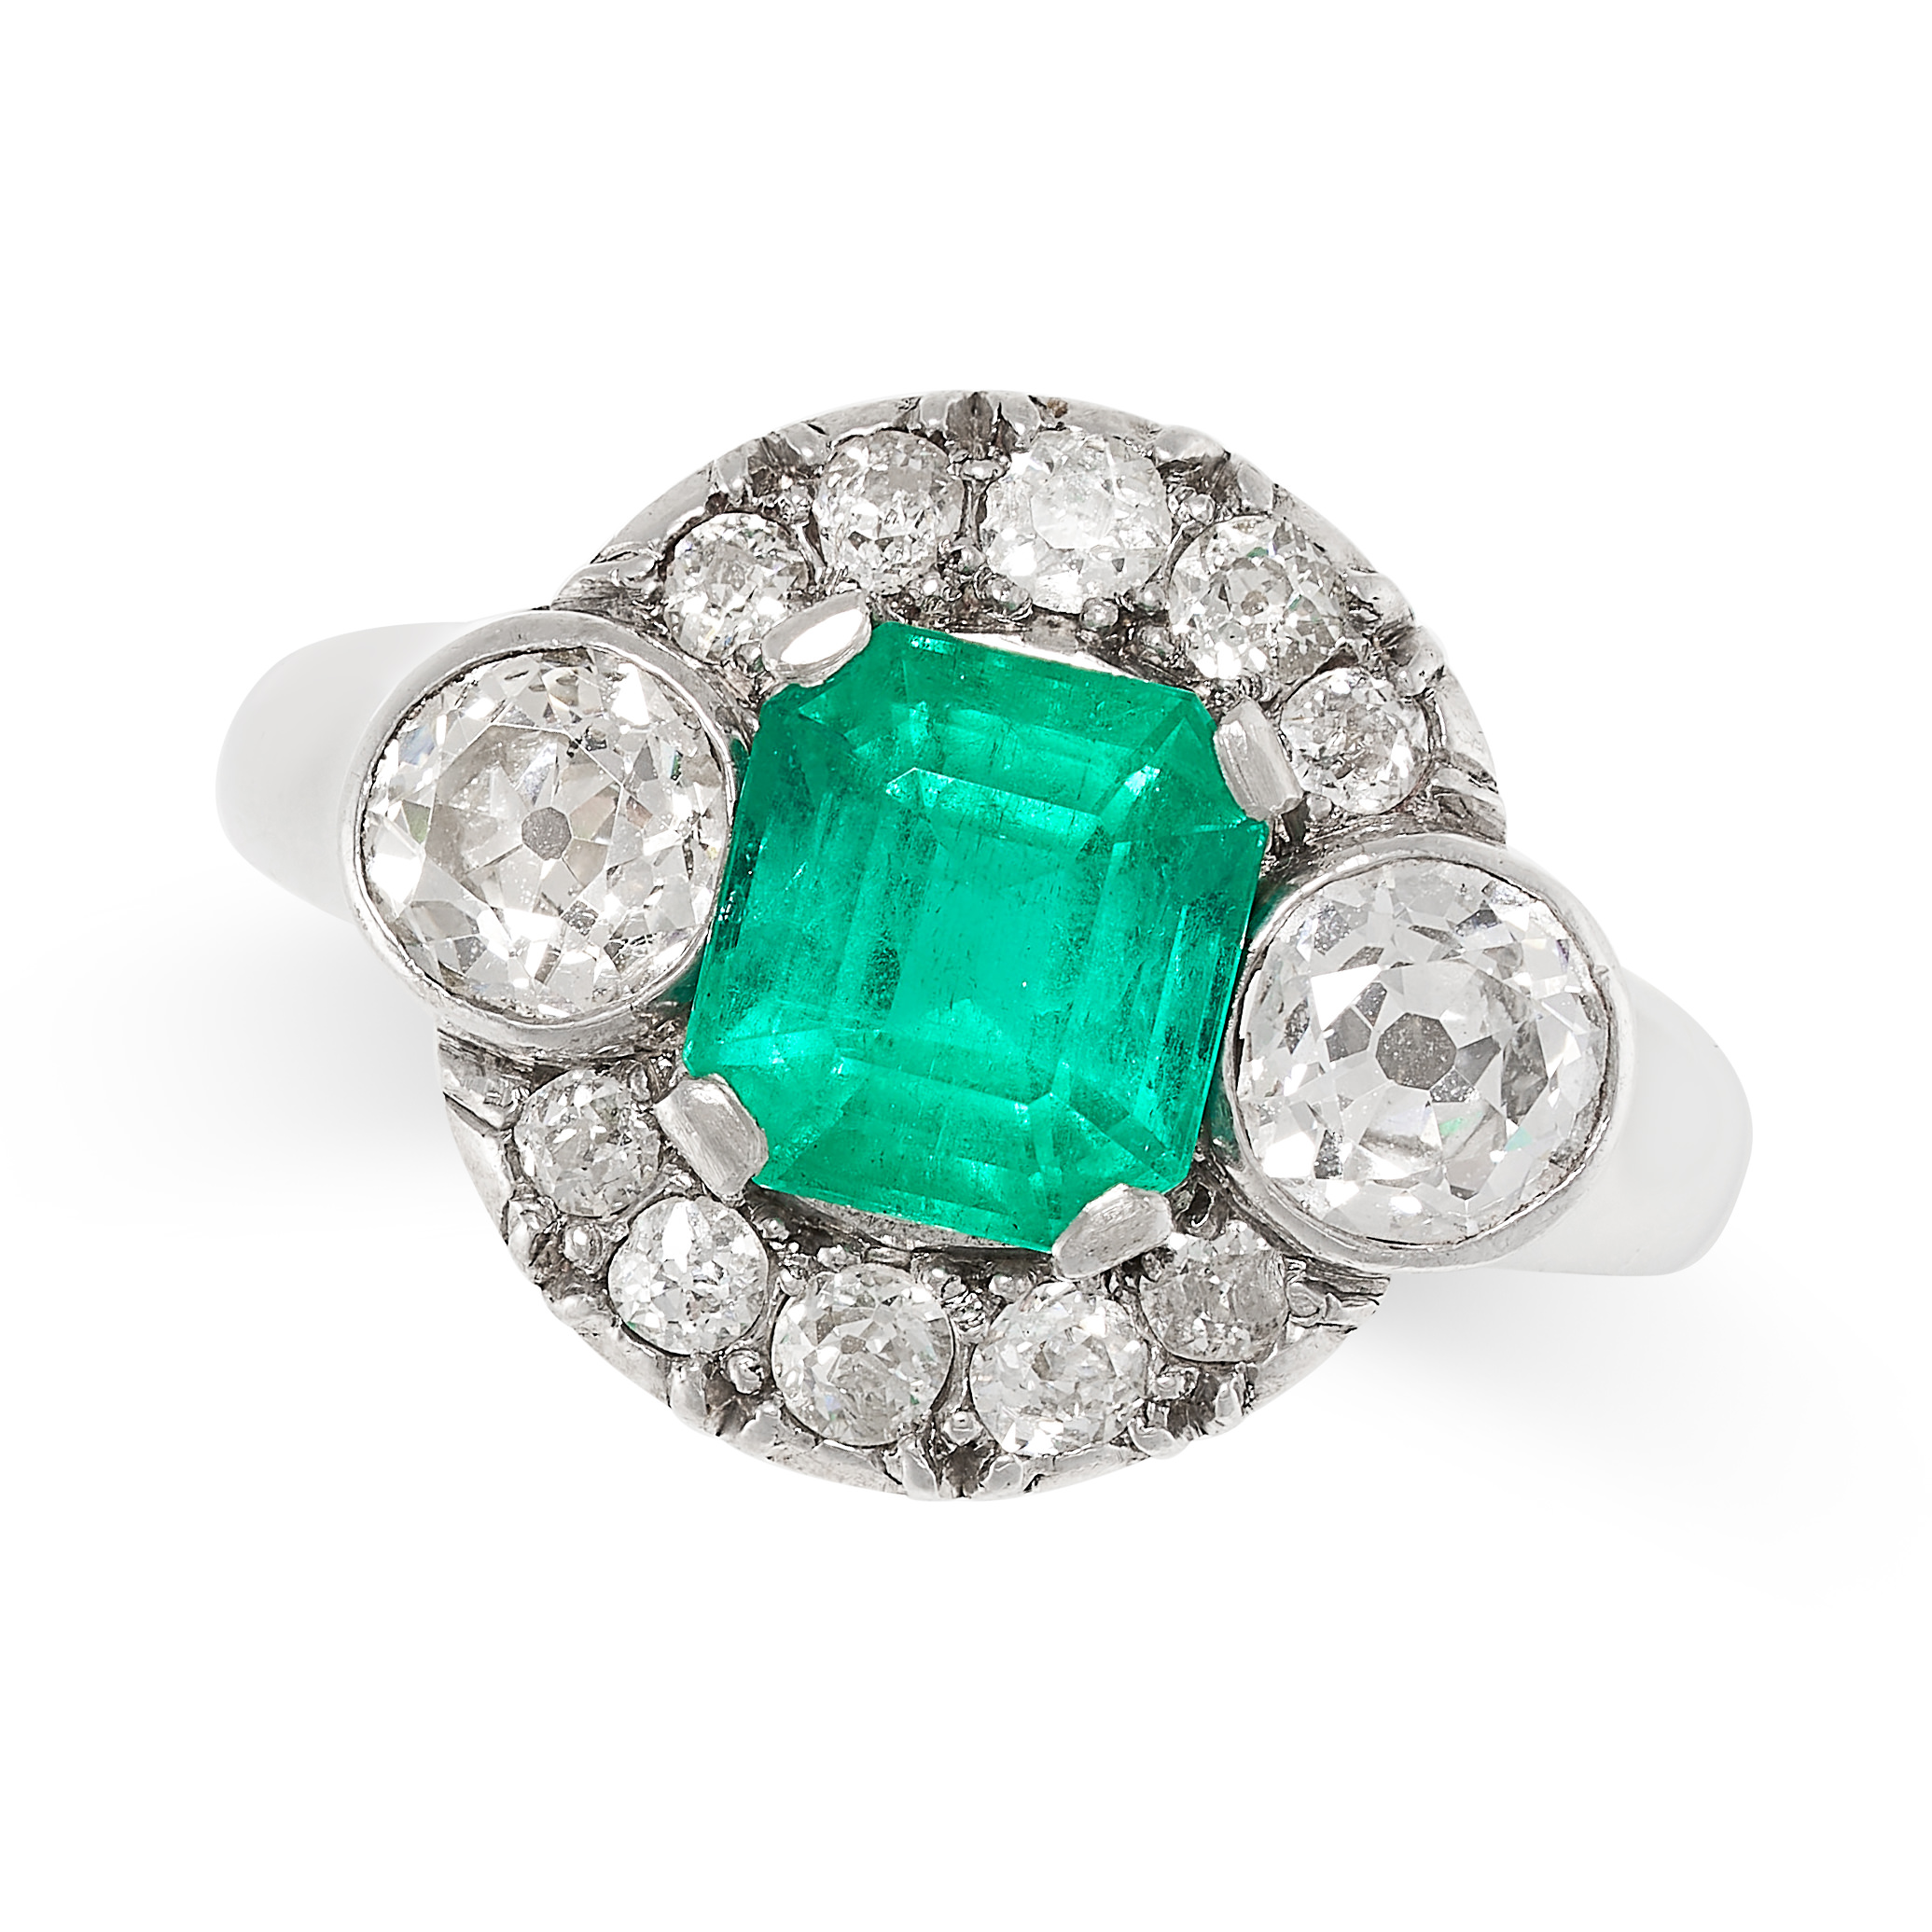 A COLOMBIAN EMERALD AND DIAMOND RING set to the centre with an octagonal cut emerald of 1.42